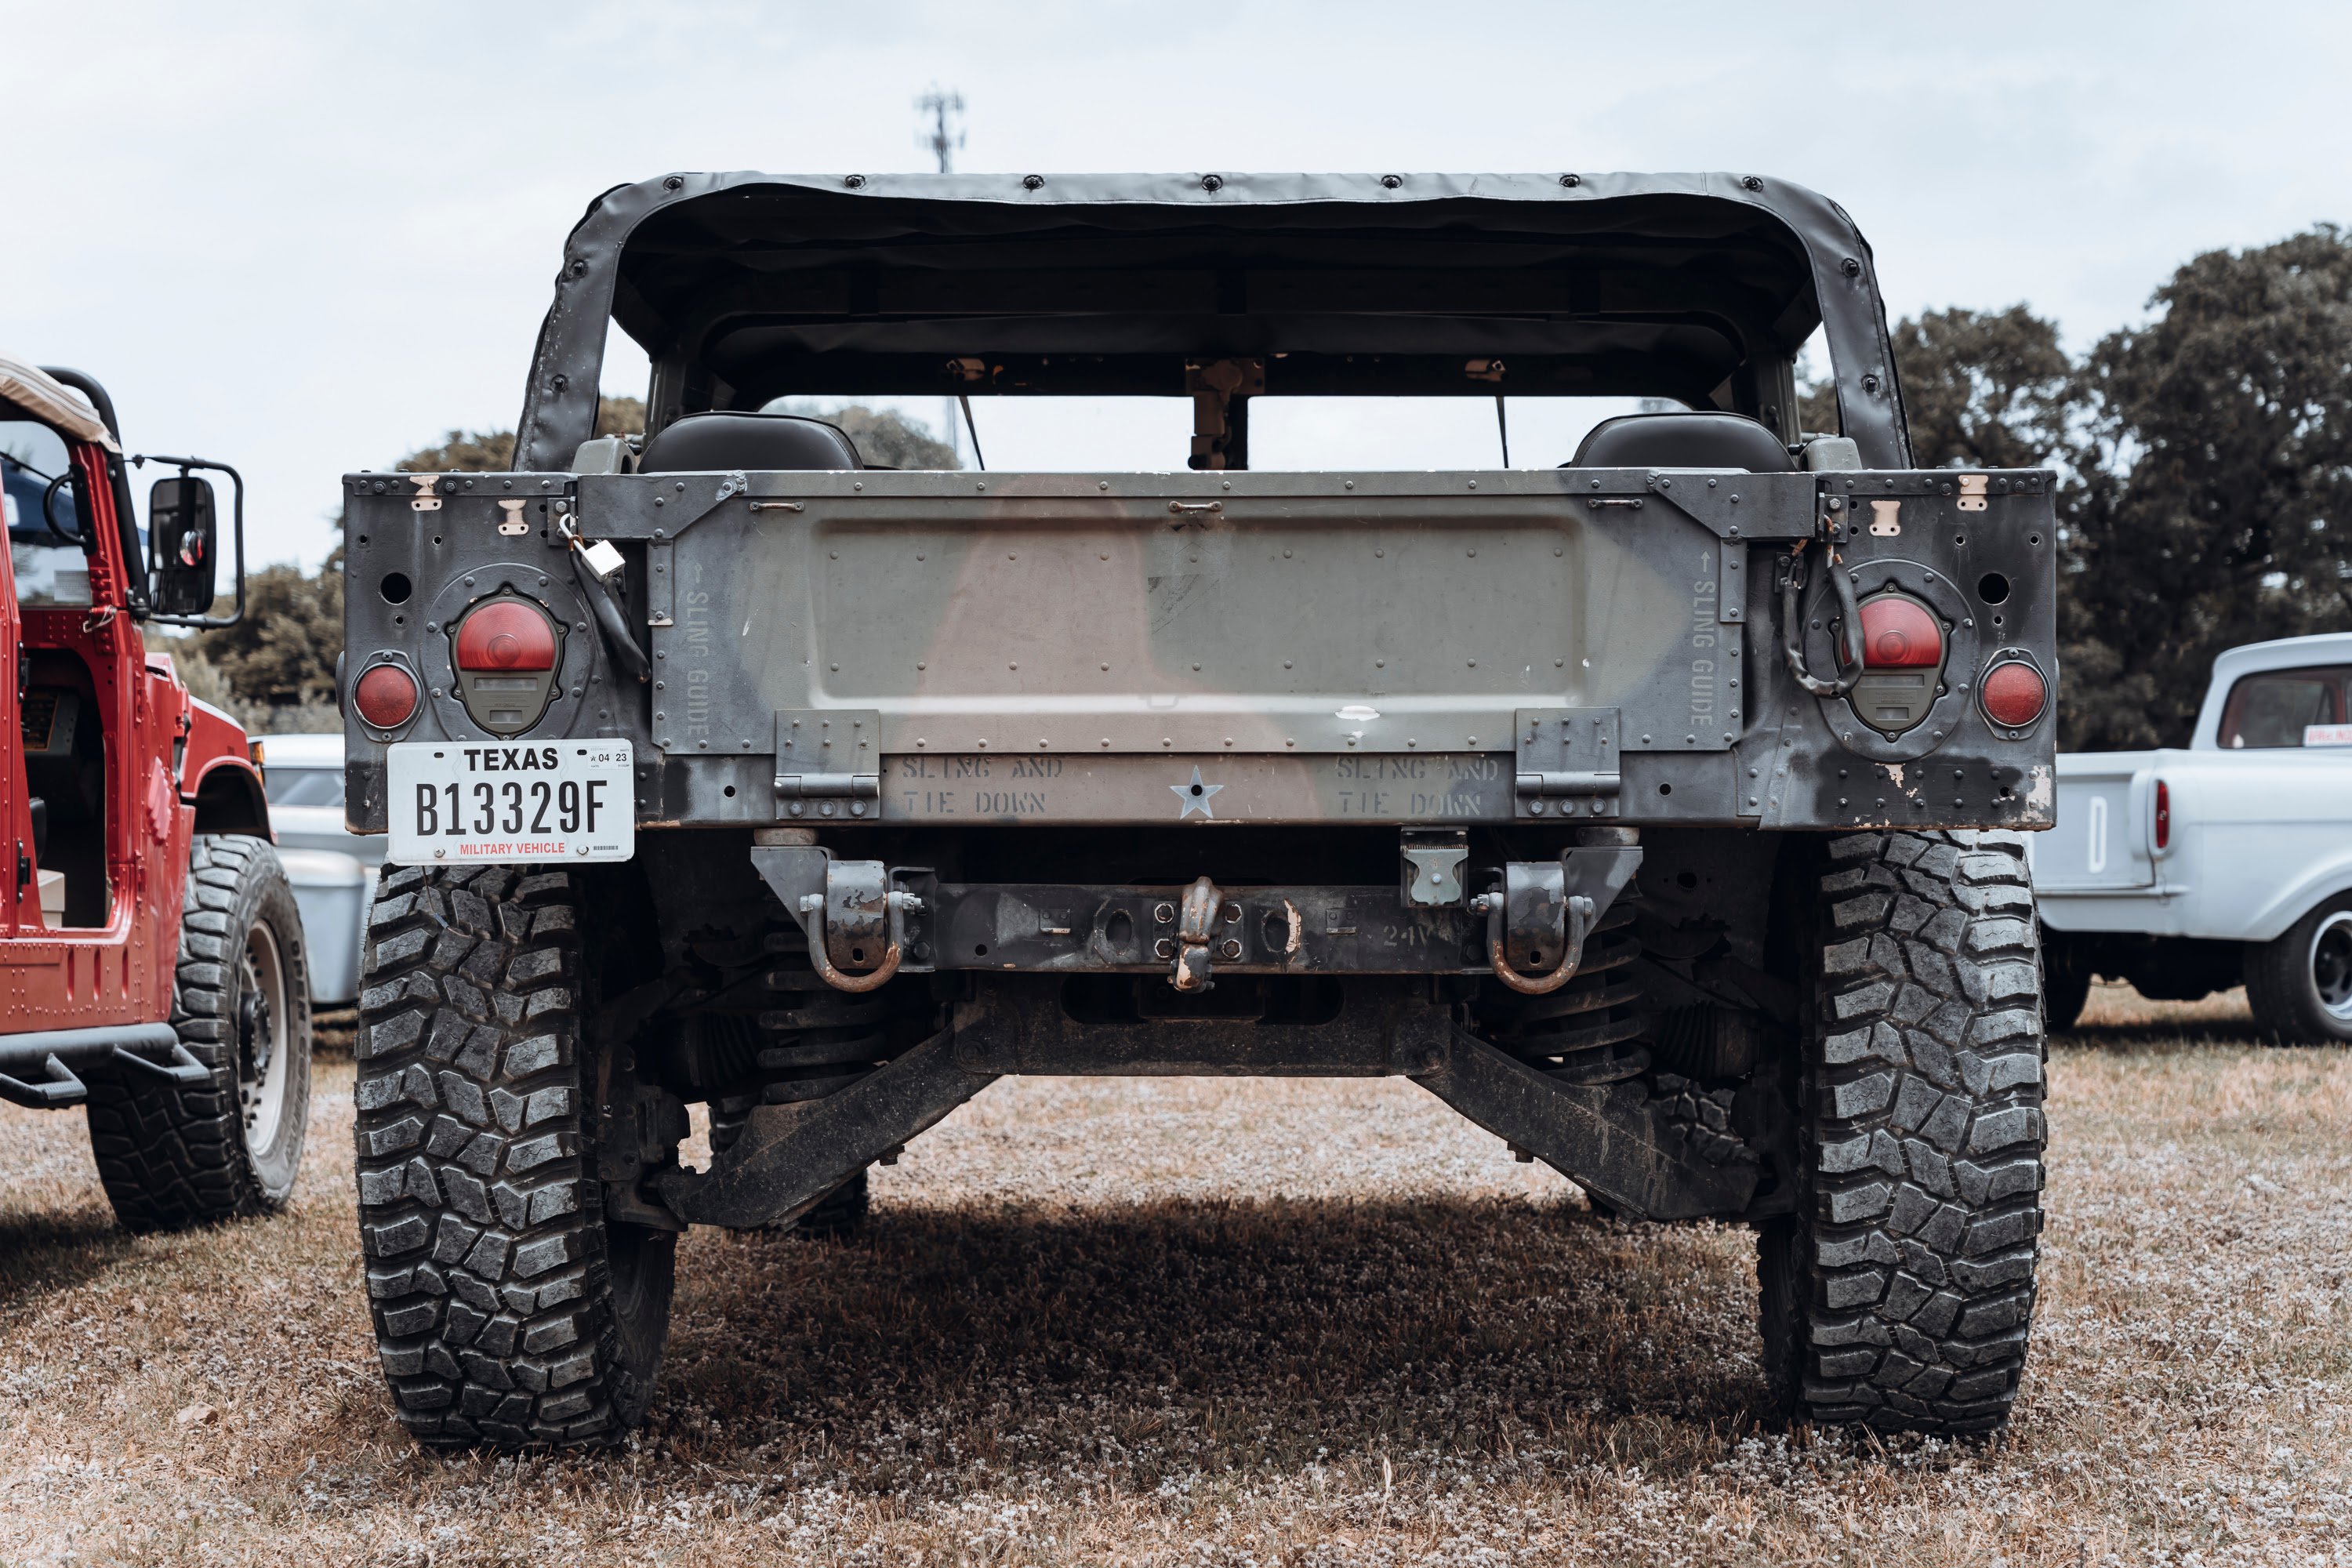 The rear end of an H1.